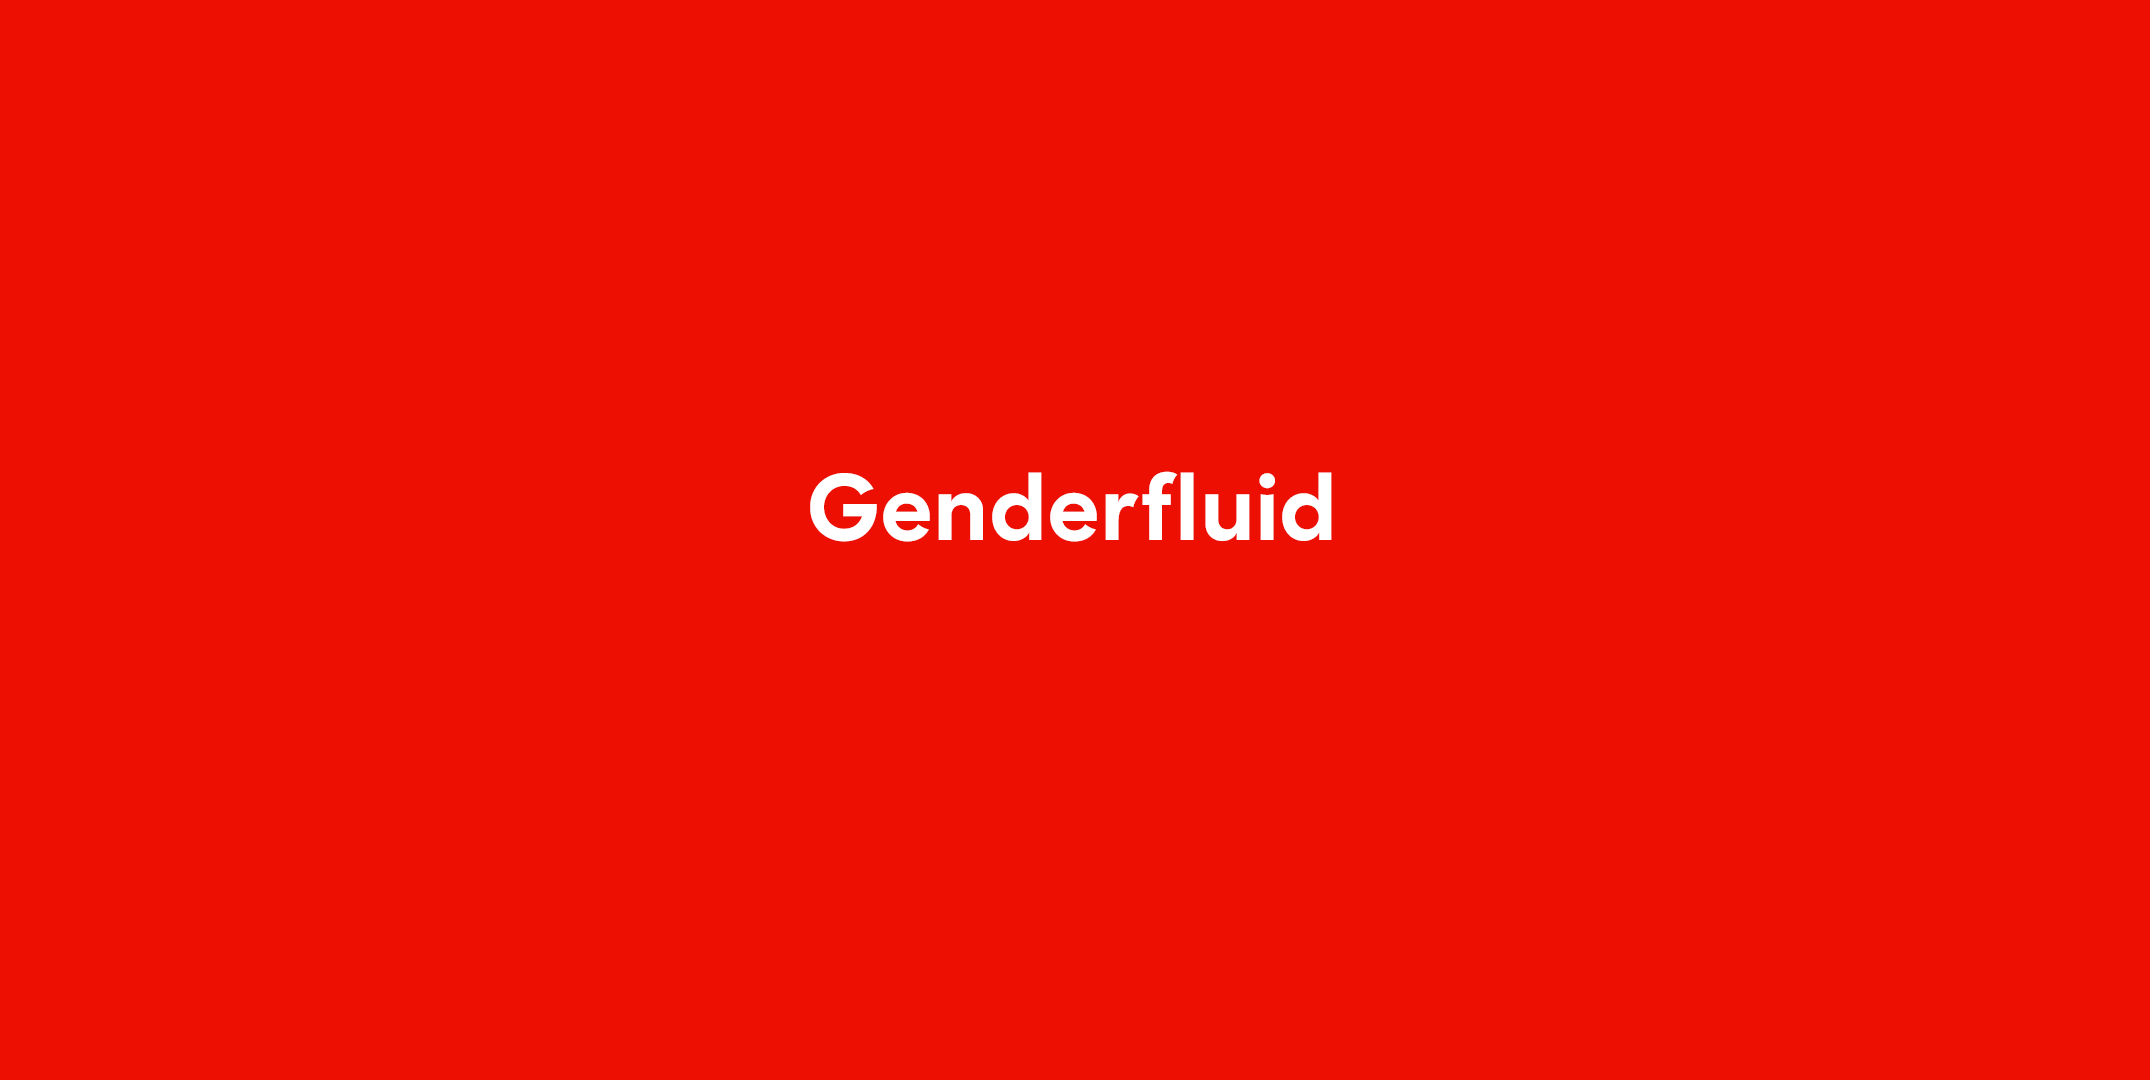 Genderfluid Definition - What Does It Mean to Be Gender Fluid